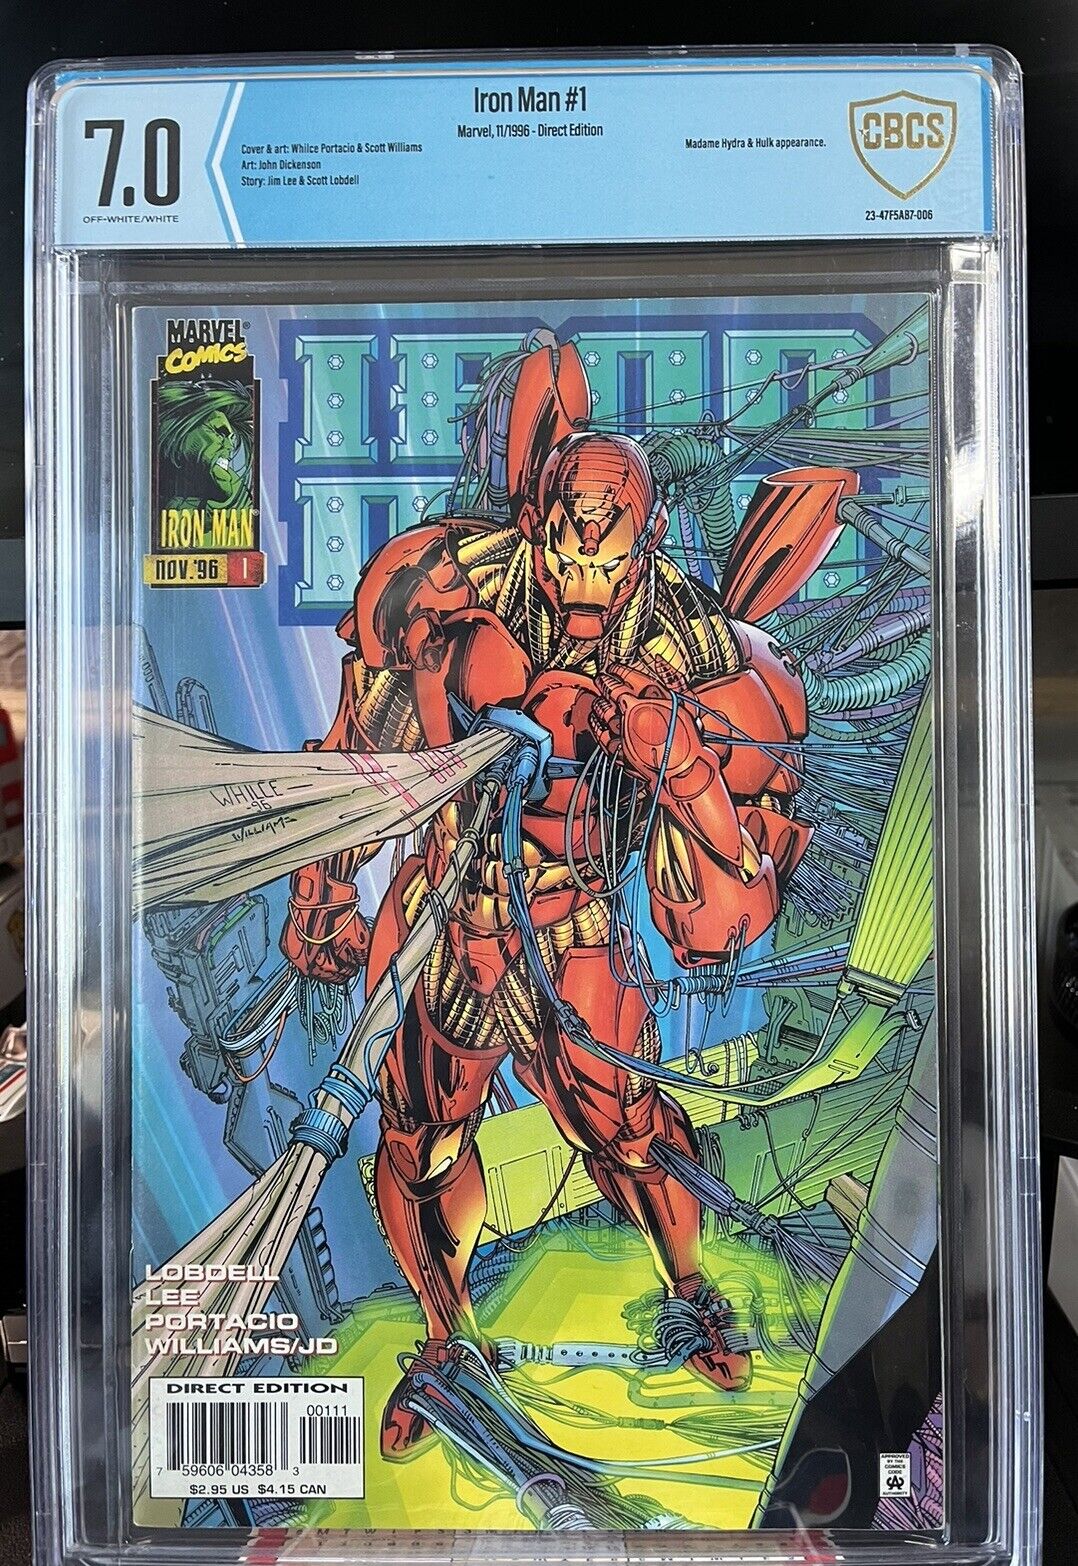 Iron Man Issue #v2 #1 Marvel Comics 1996 CBCS Graded 7.5 White Pages Comic Book